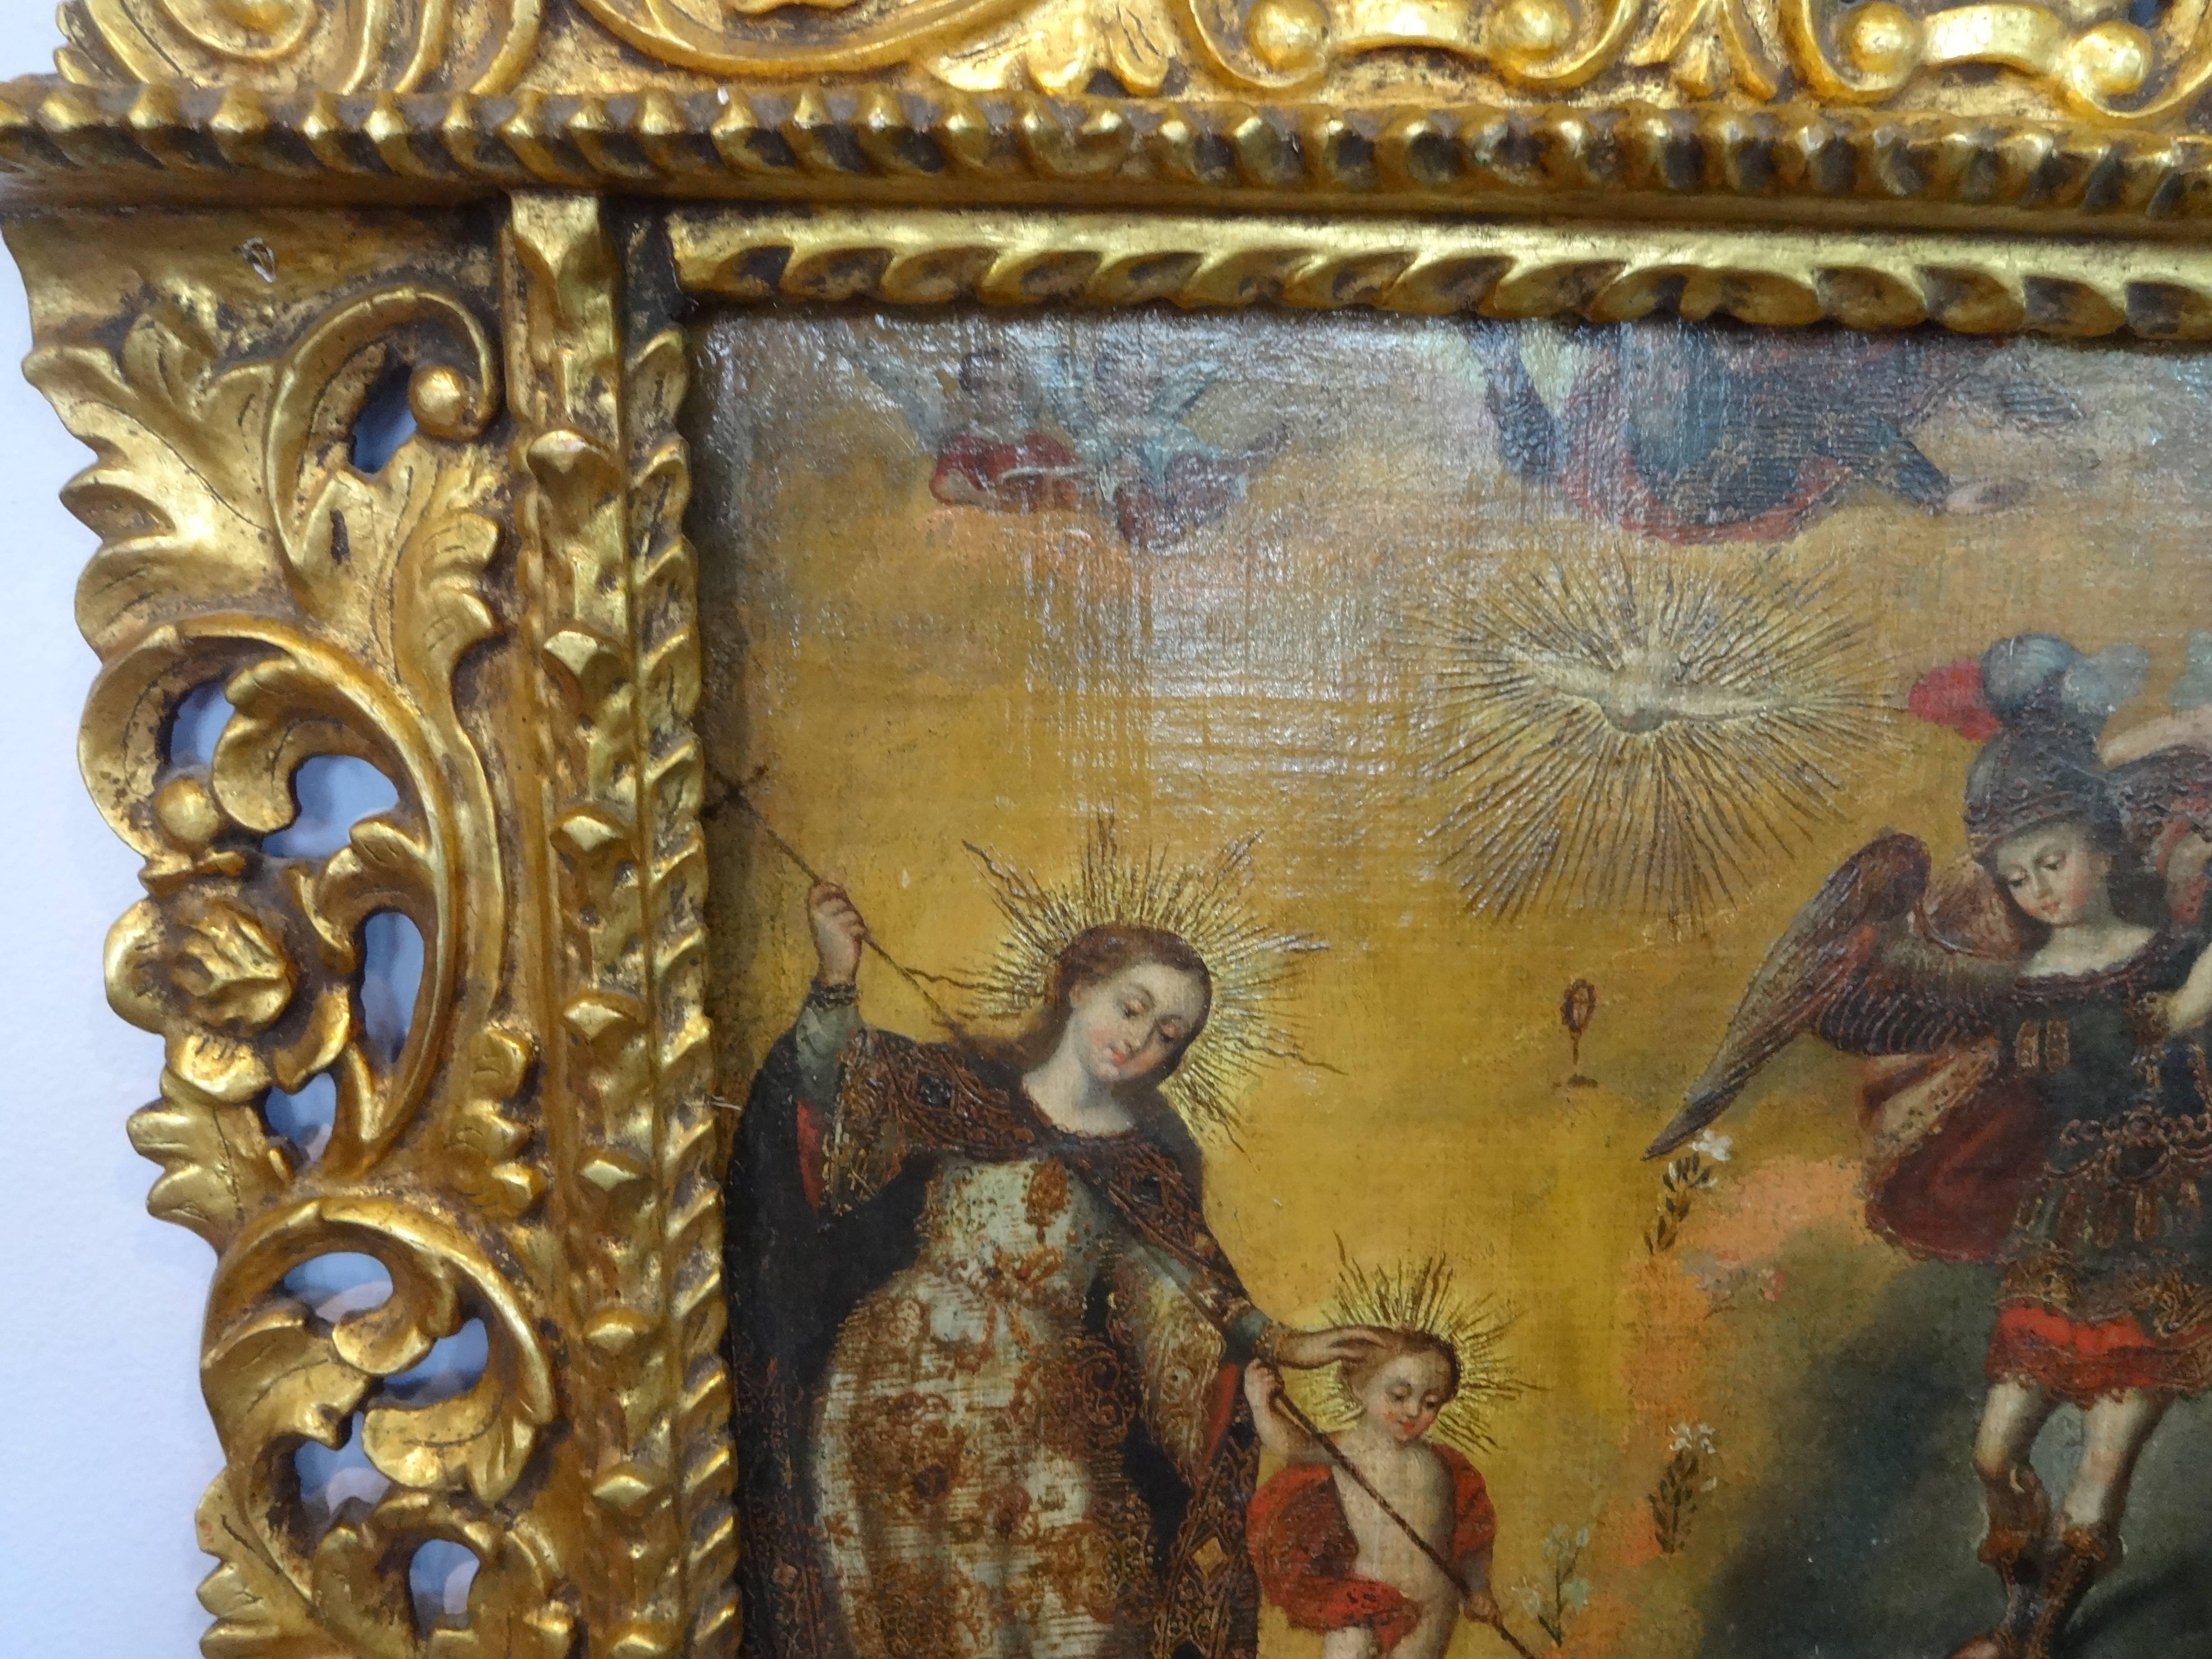 An exceptional Spanish Colonial oil painting on canvas mounted on board beautifully depicting the Virgin Mary and Jesus slaying a dragon with Saint Michael the Archangel looking on, restored, in mint condition, set in hand-carved gold leaf period